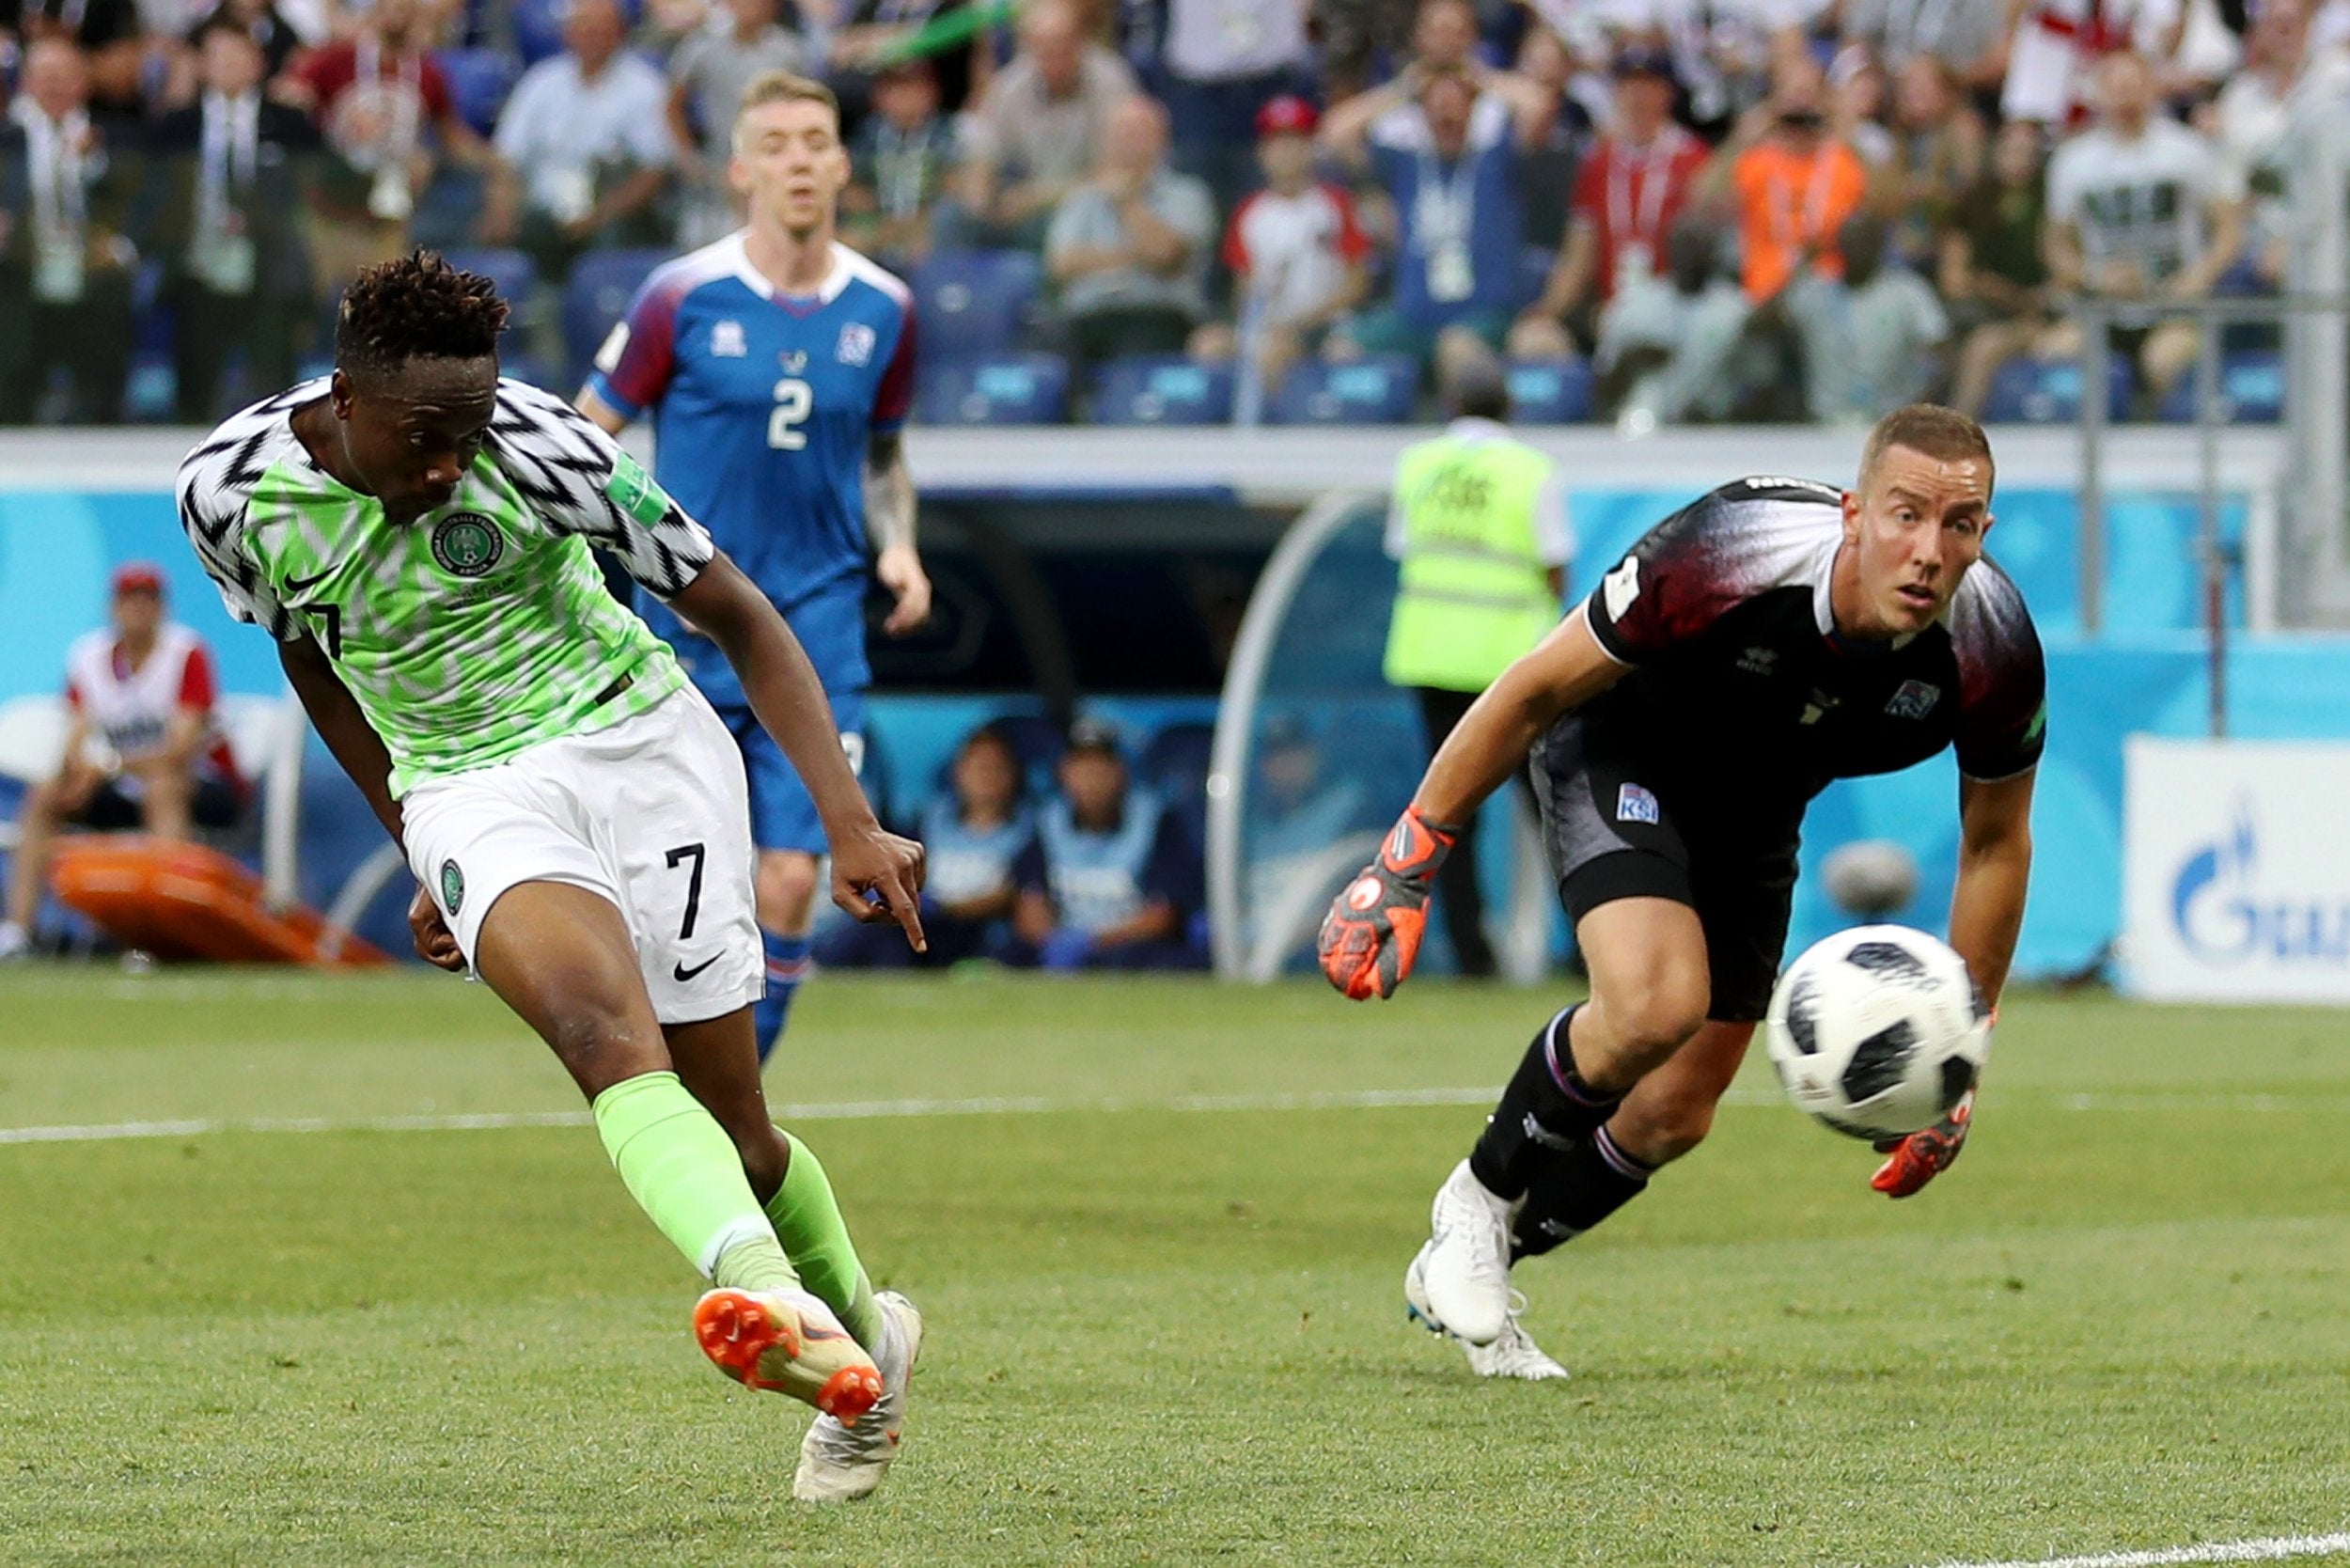 Ahmed Musa scores Nigeria's second goal against Iceland